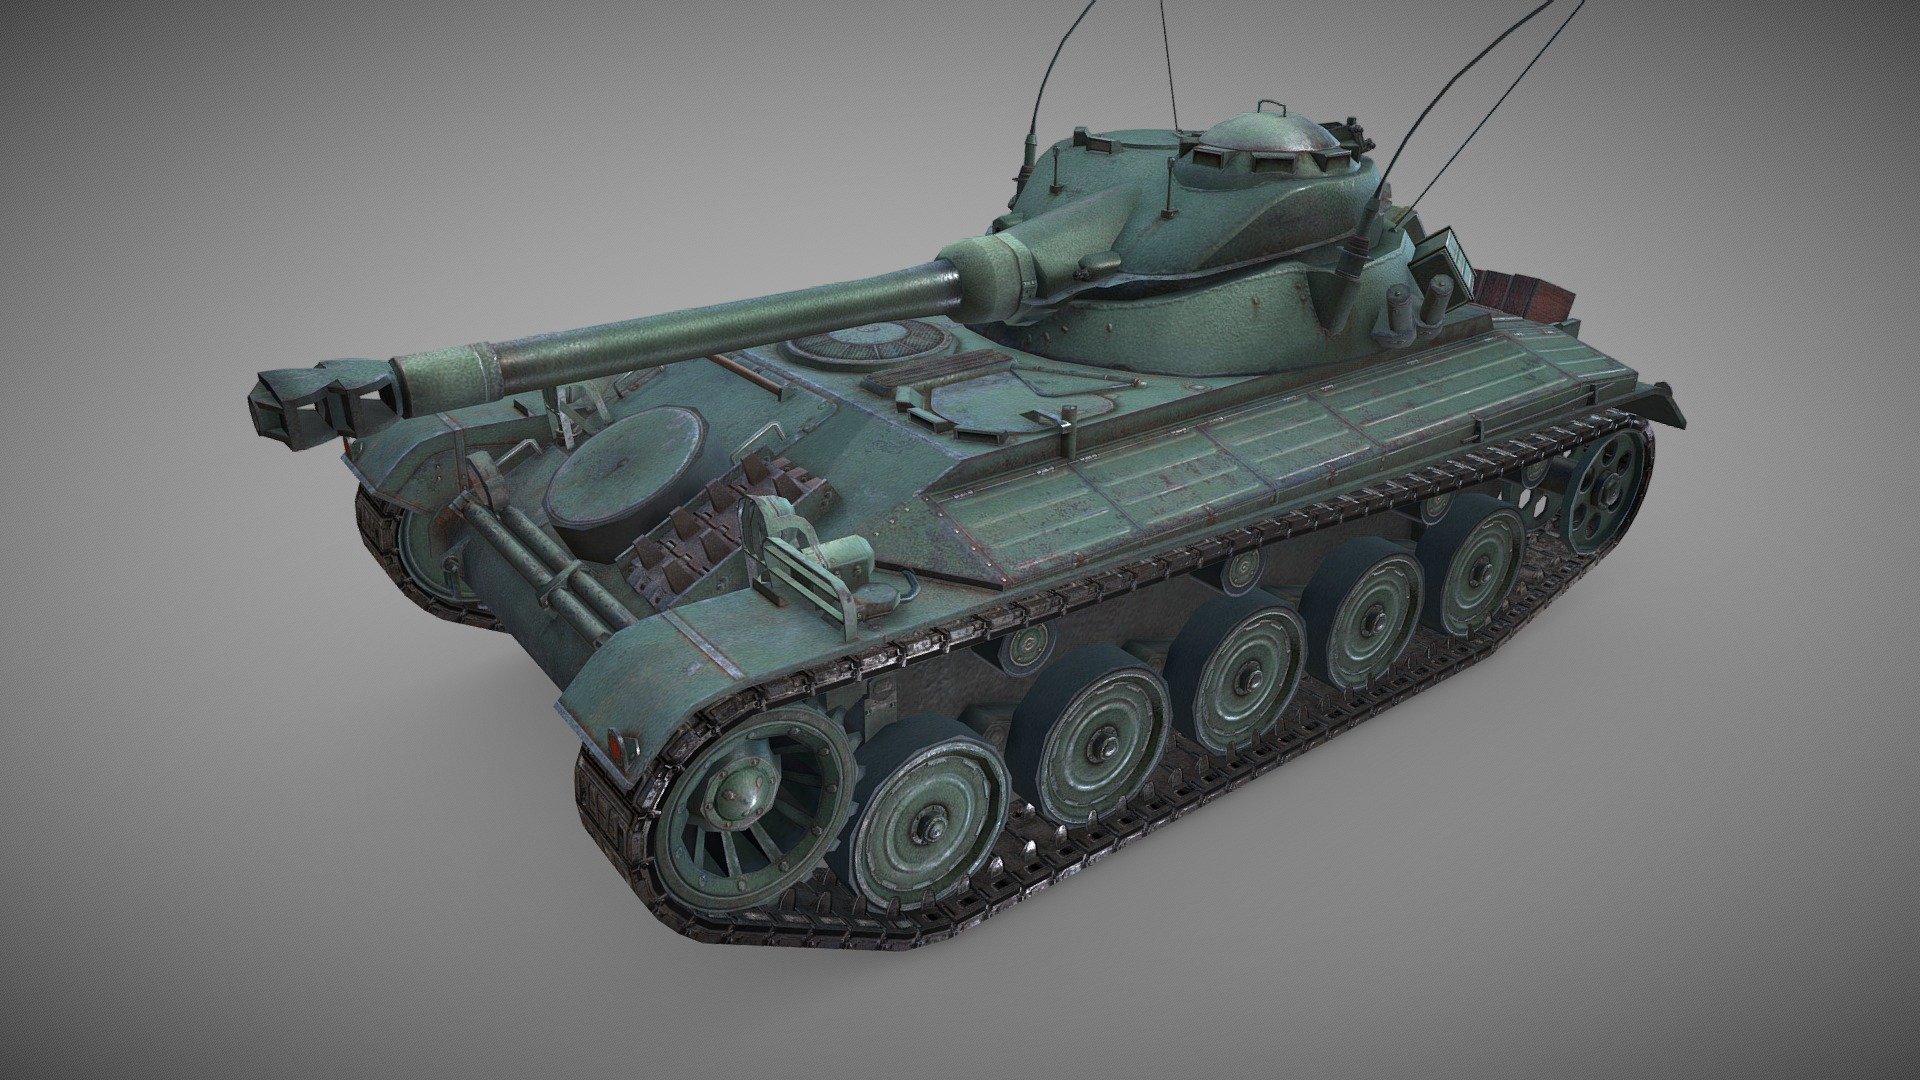 AMX 13 FL11 -  is a French light tank. This model was created for the “World of Tanks” game project. My part was creation of high-detailed realistic textures 3d model